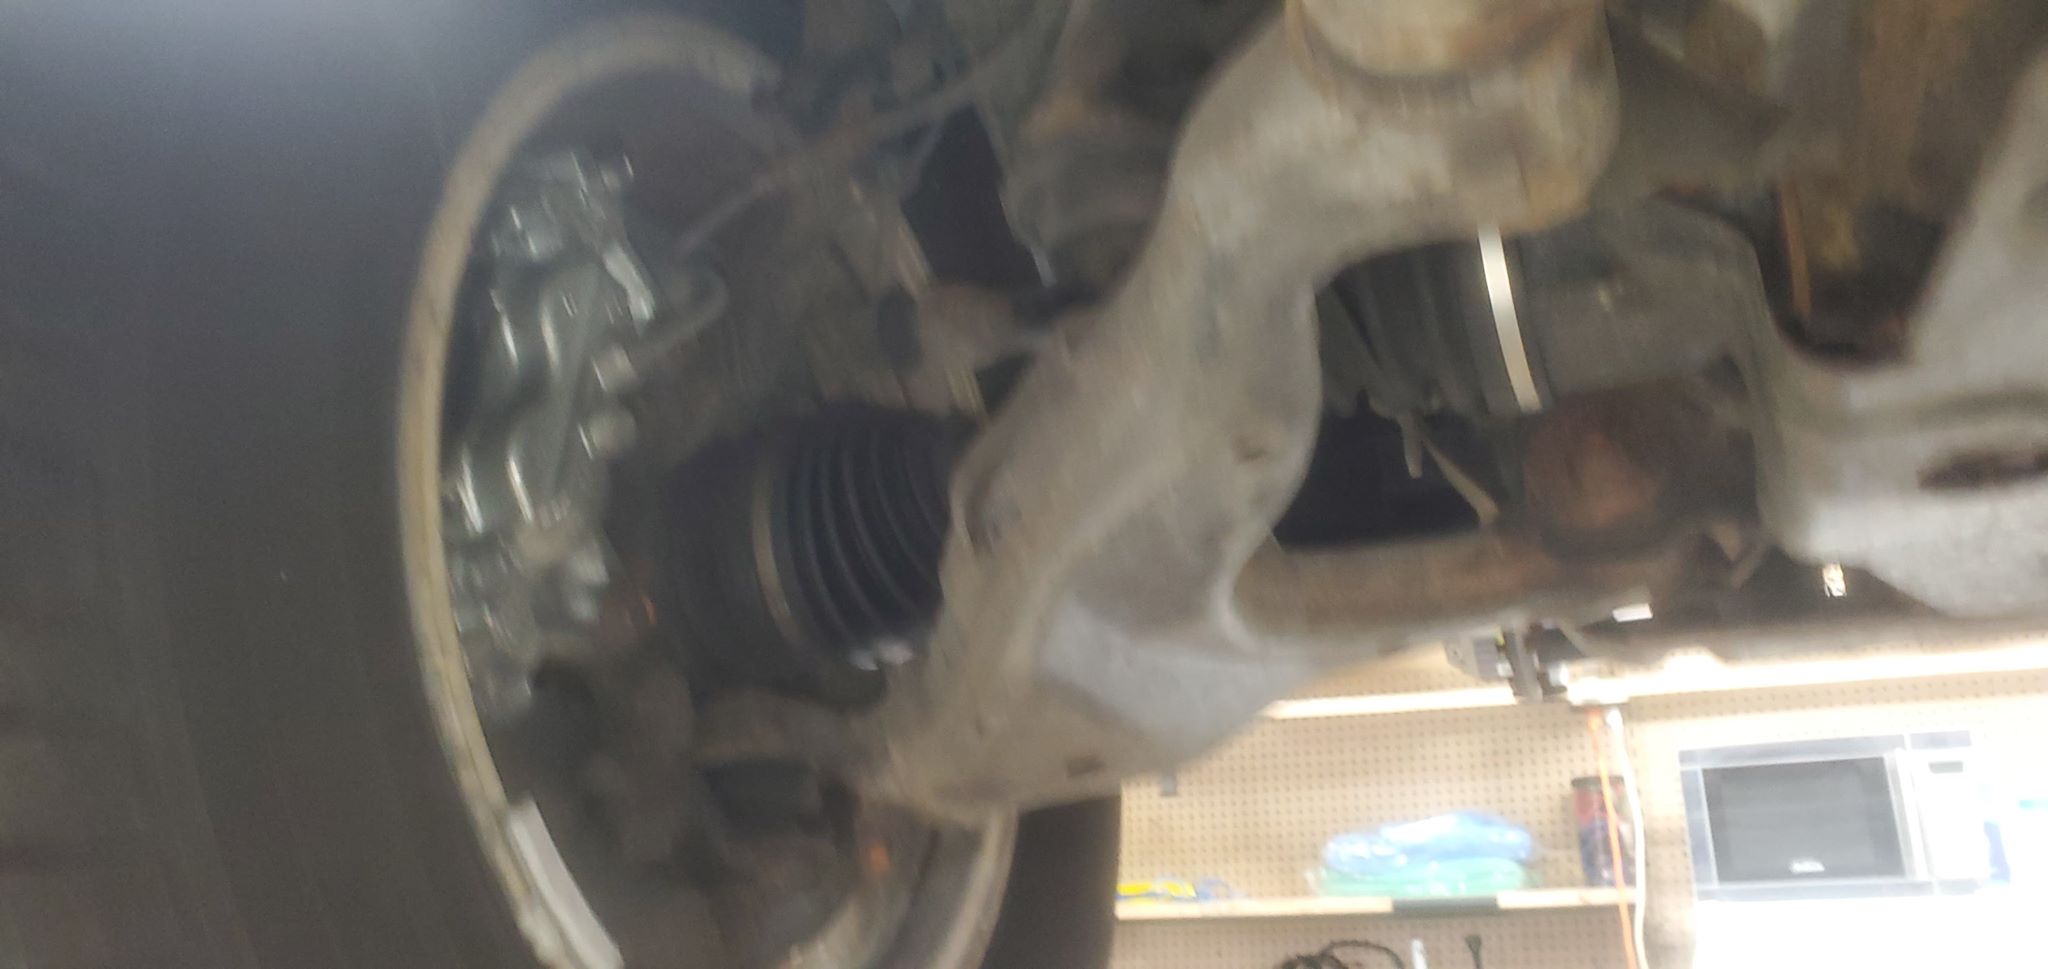 How much is too much rust on a 2006 4Runner?-83164508_2804602709622304_5603707813219008512_n-jpg